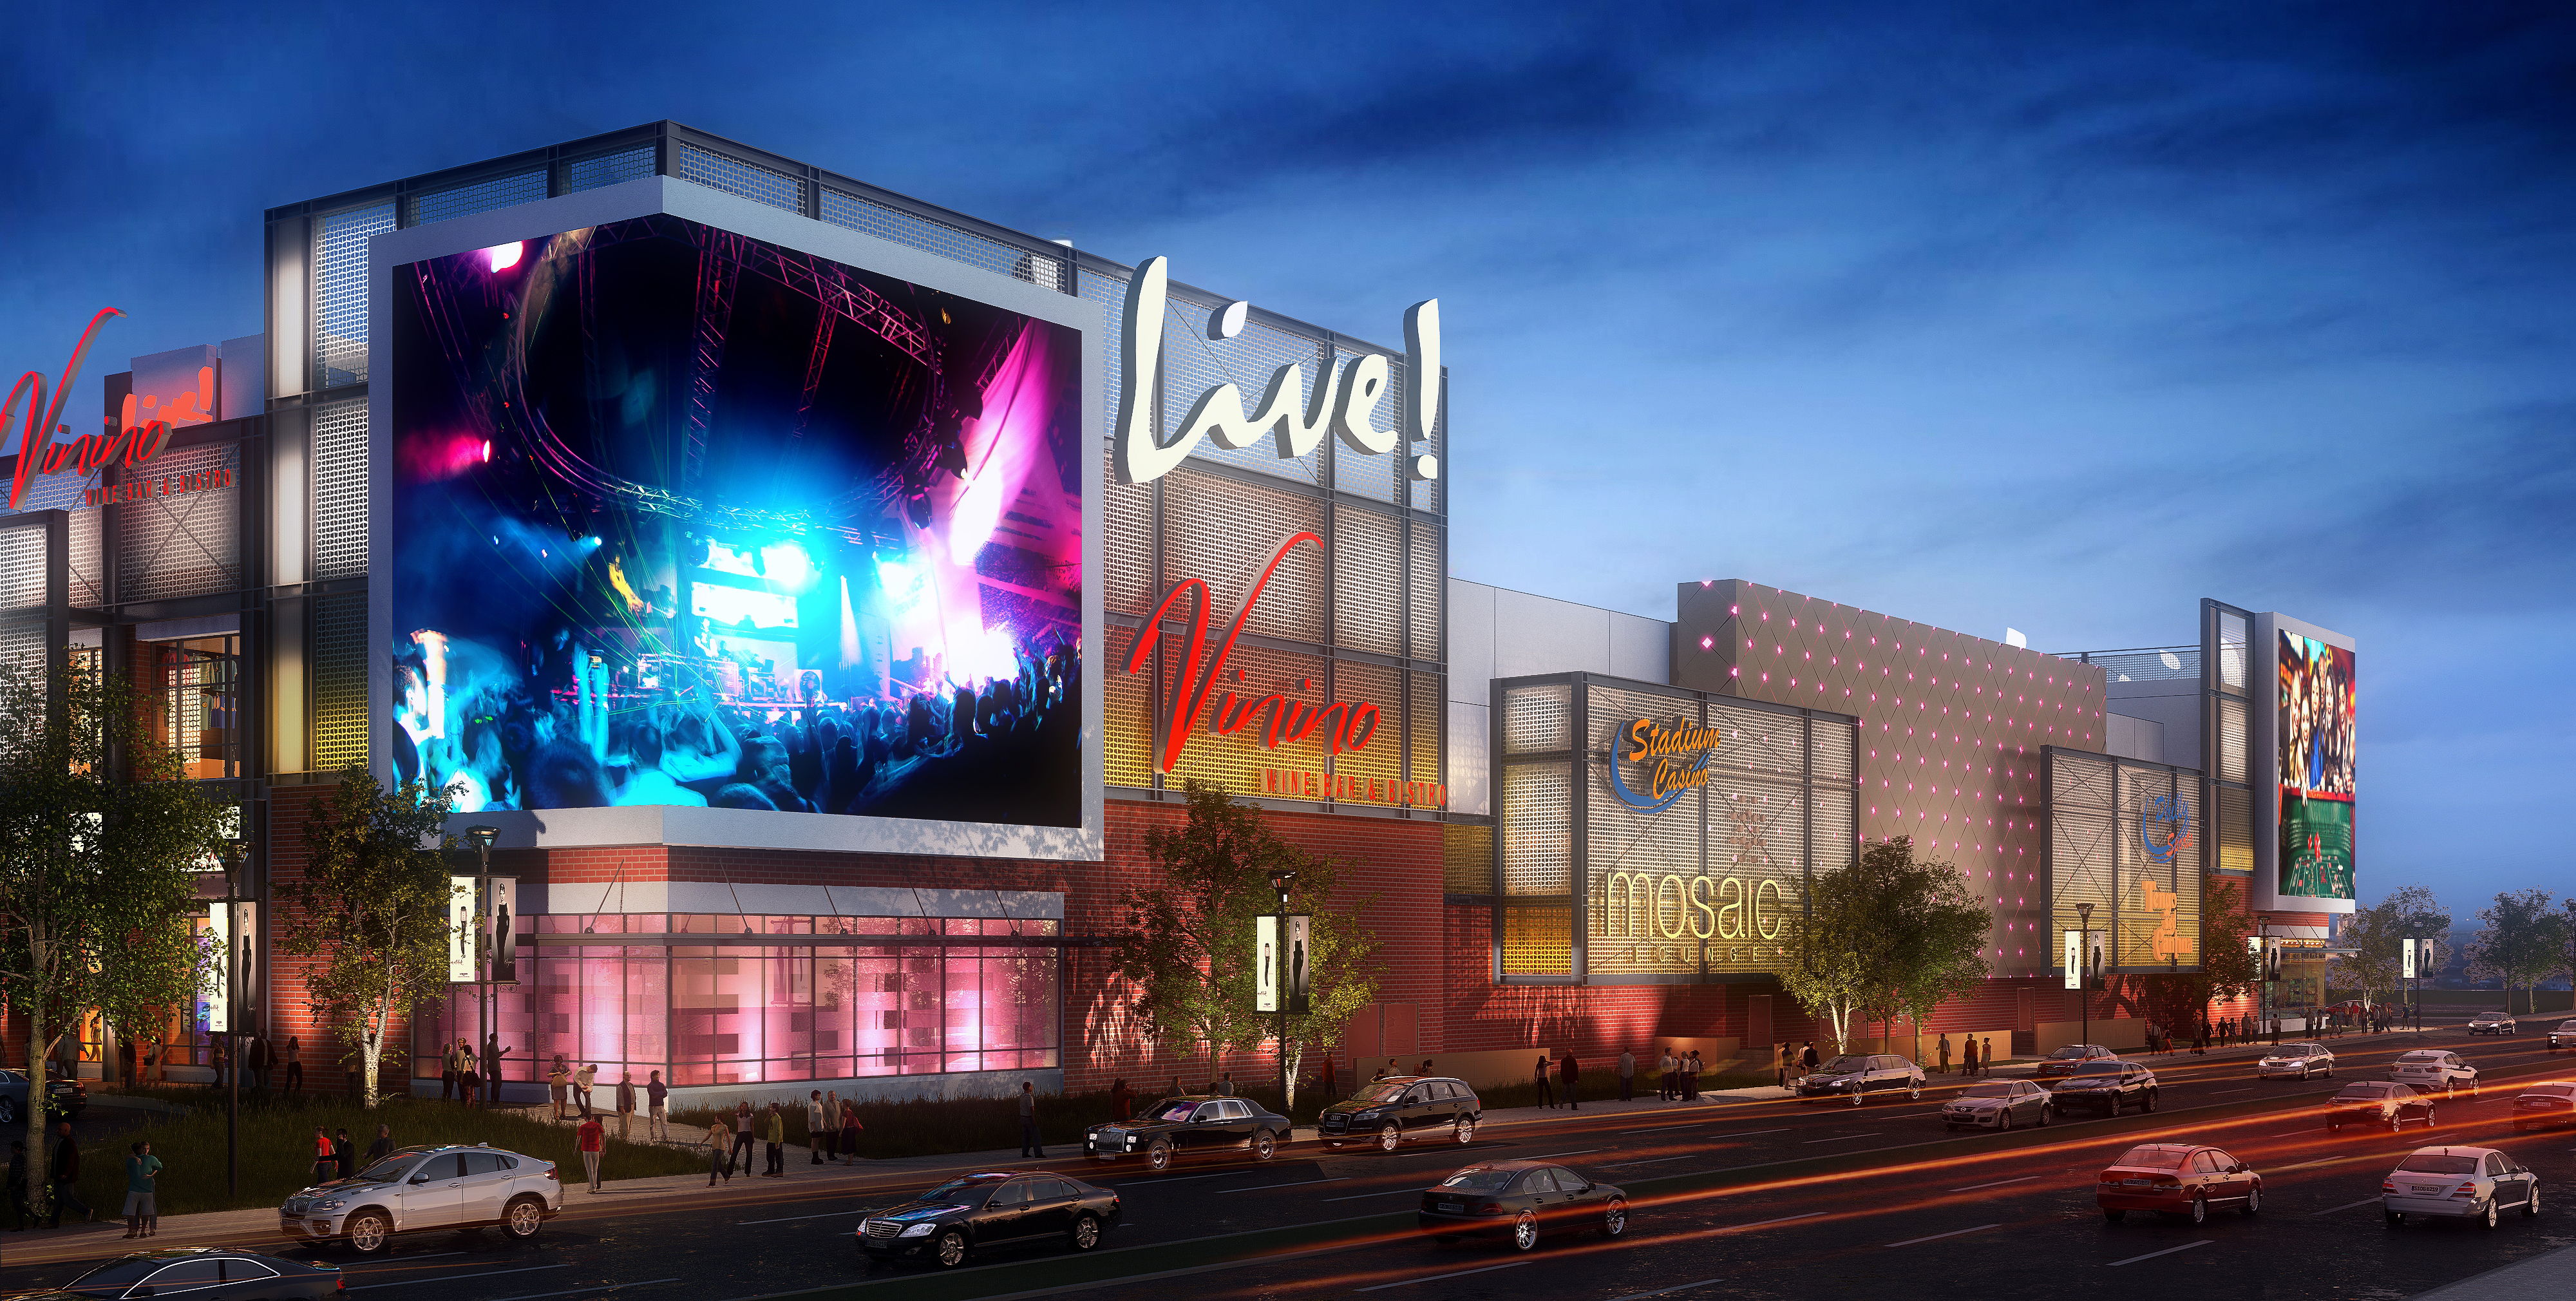 Live! Casino rendering from Packer Avenue perspective.